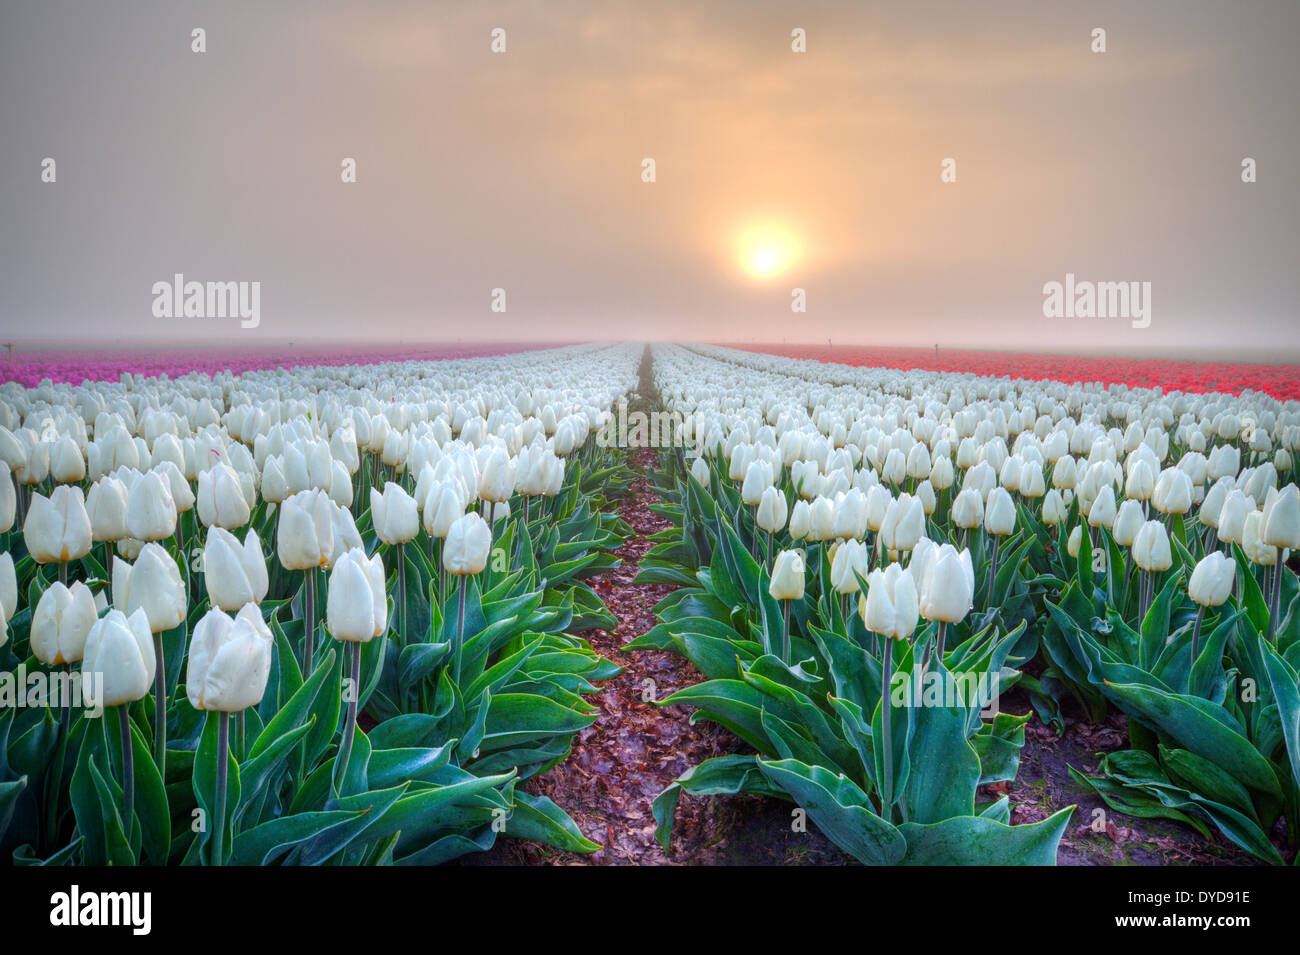 Sunrise over a field with red, white and pink tulips on a misty morning Stock Photo